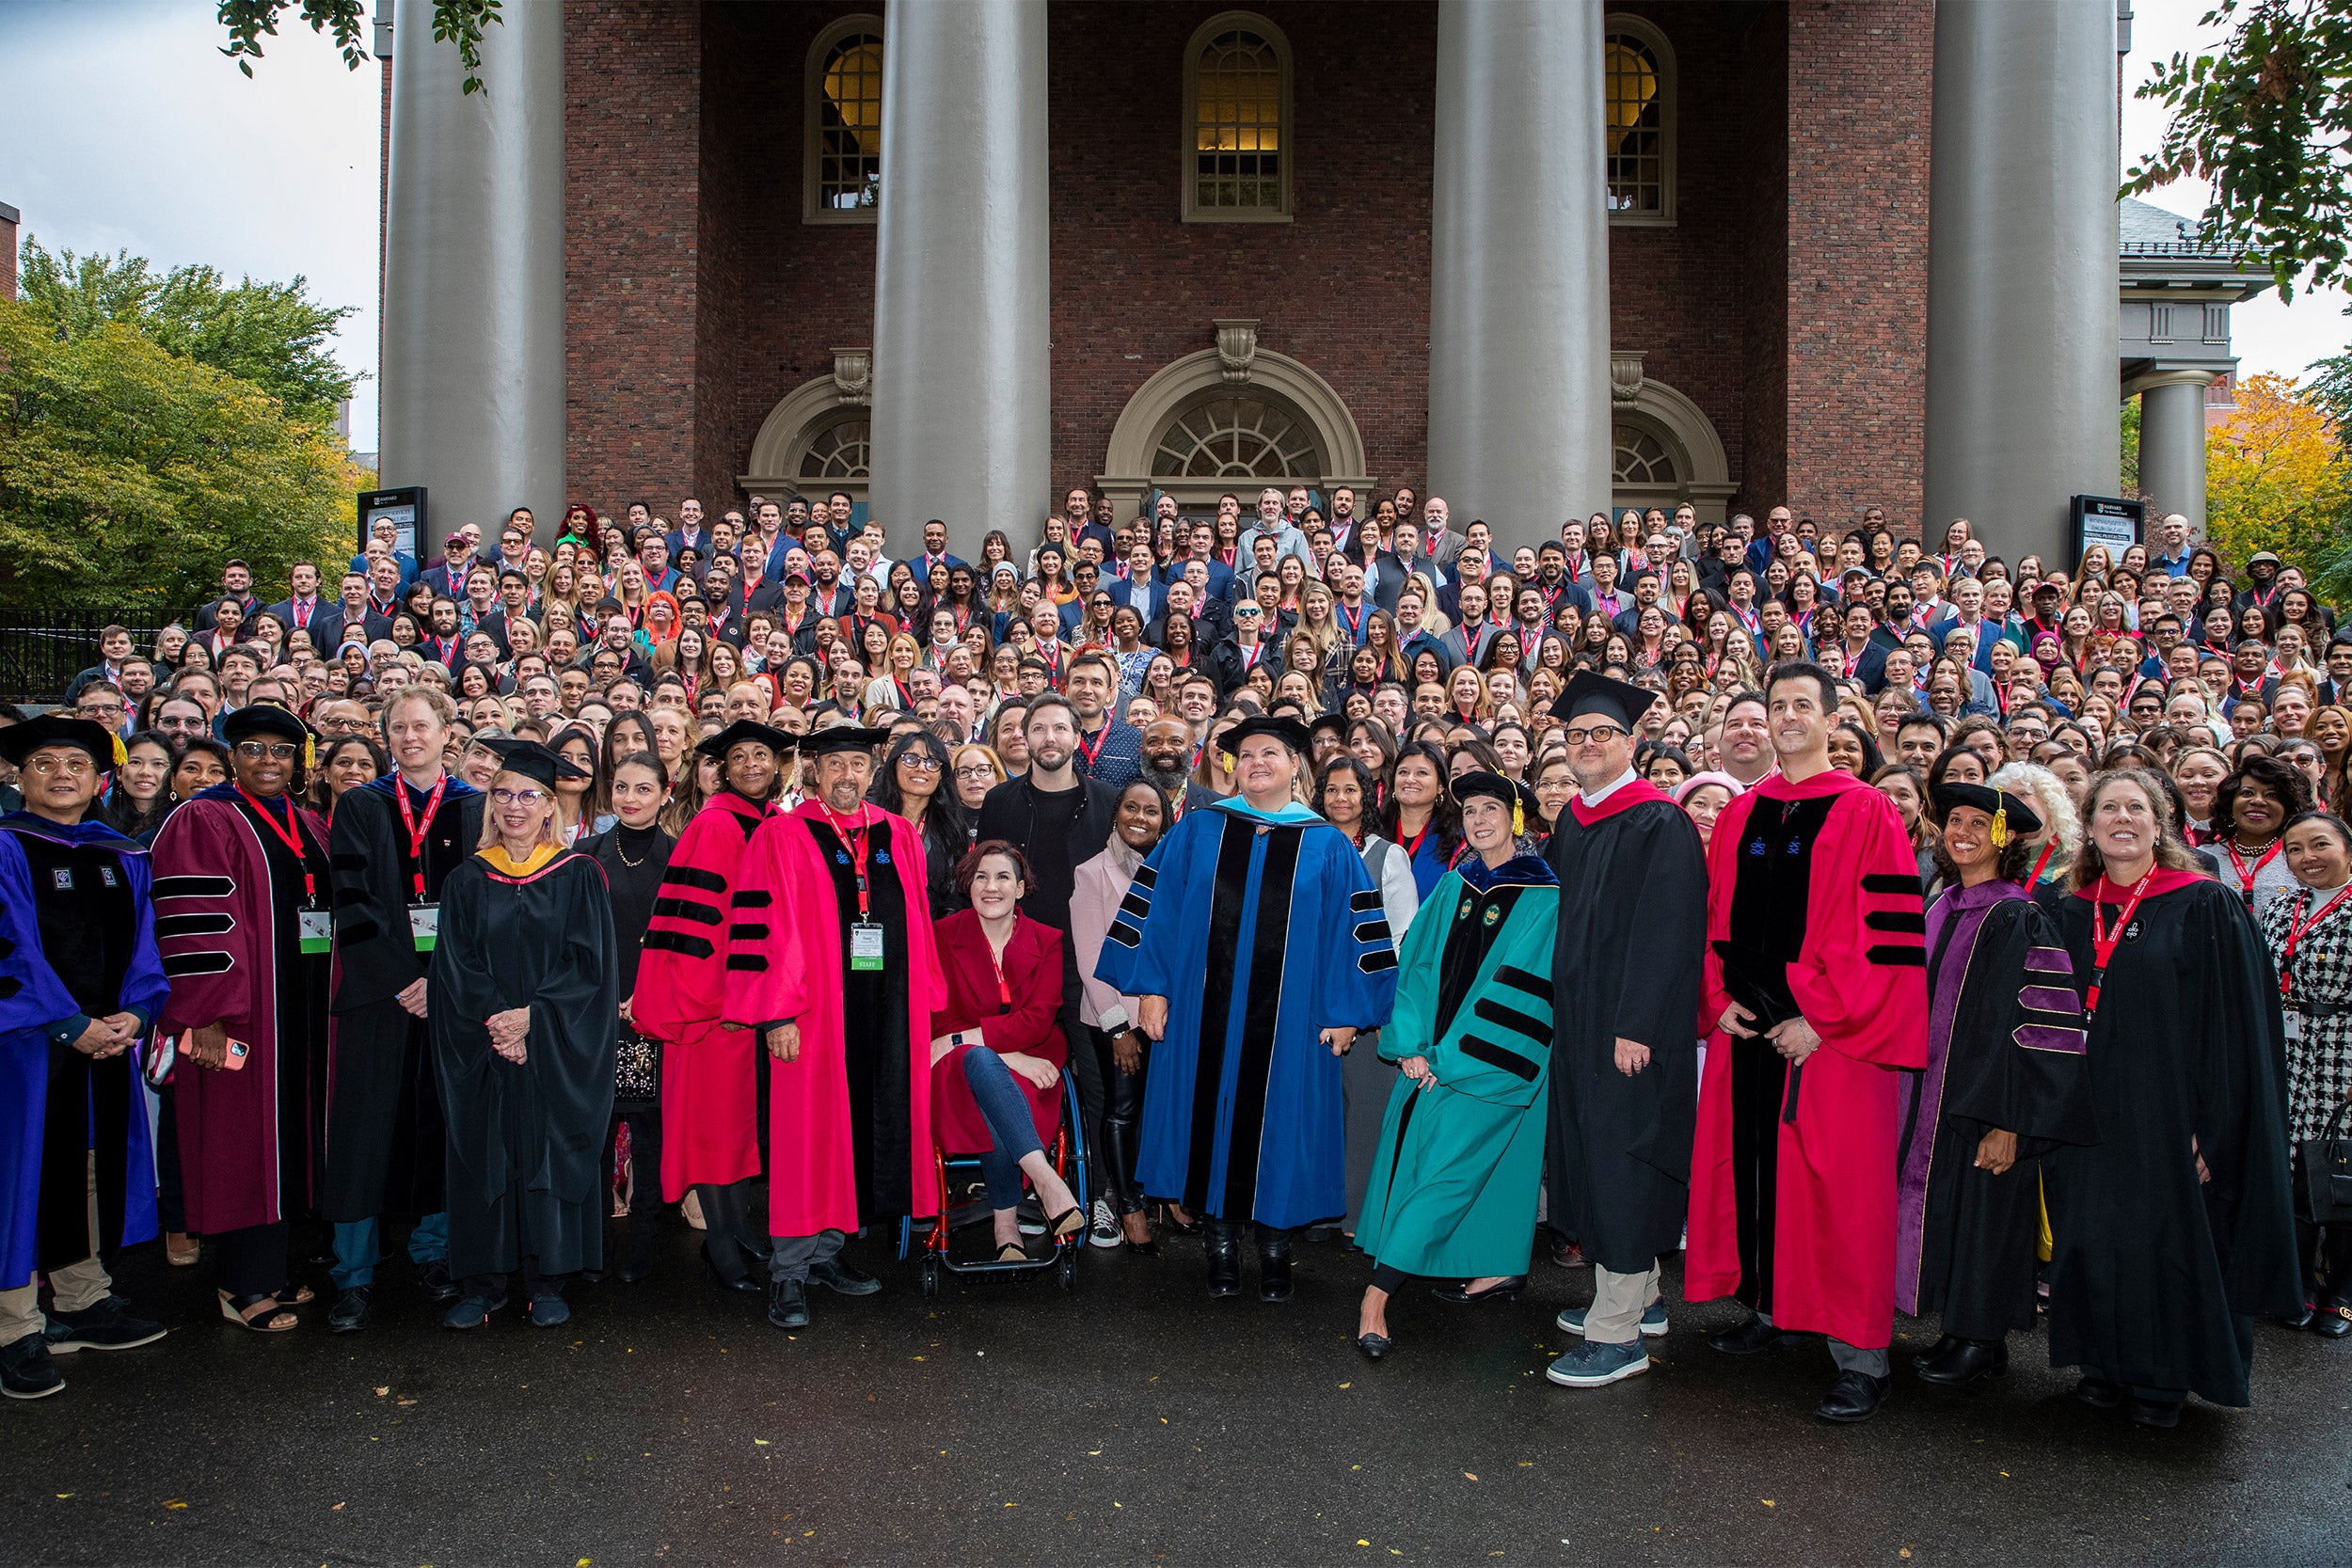 Harvard Extension School students and Deans pose for a group photo outside of Memorial Church before their convocation ceremony.